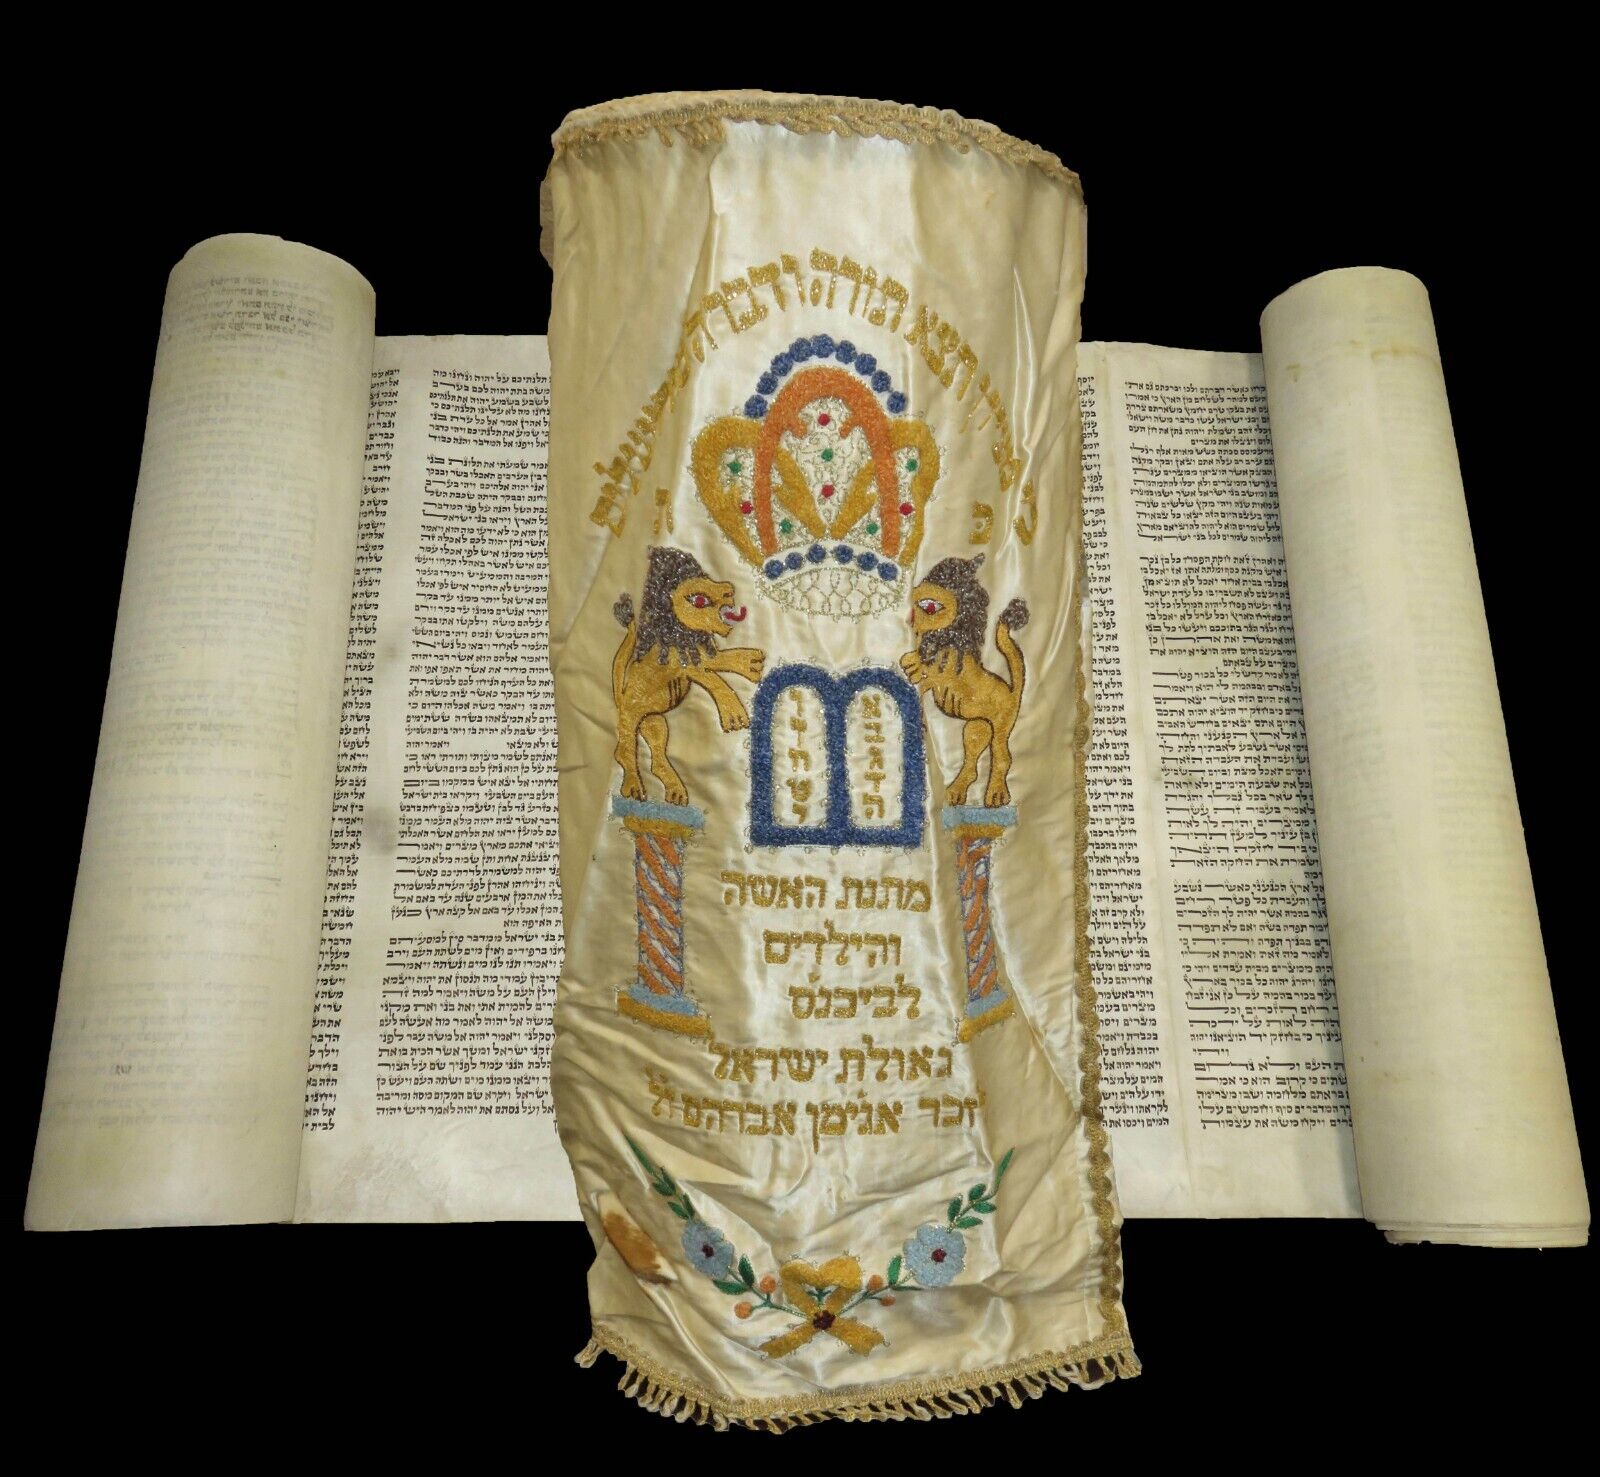 COMPLETE TORAH BIBLE SCROLL HANDWRITTEN ON PARCHMENT Germany 150 years ago.